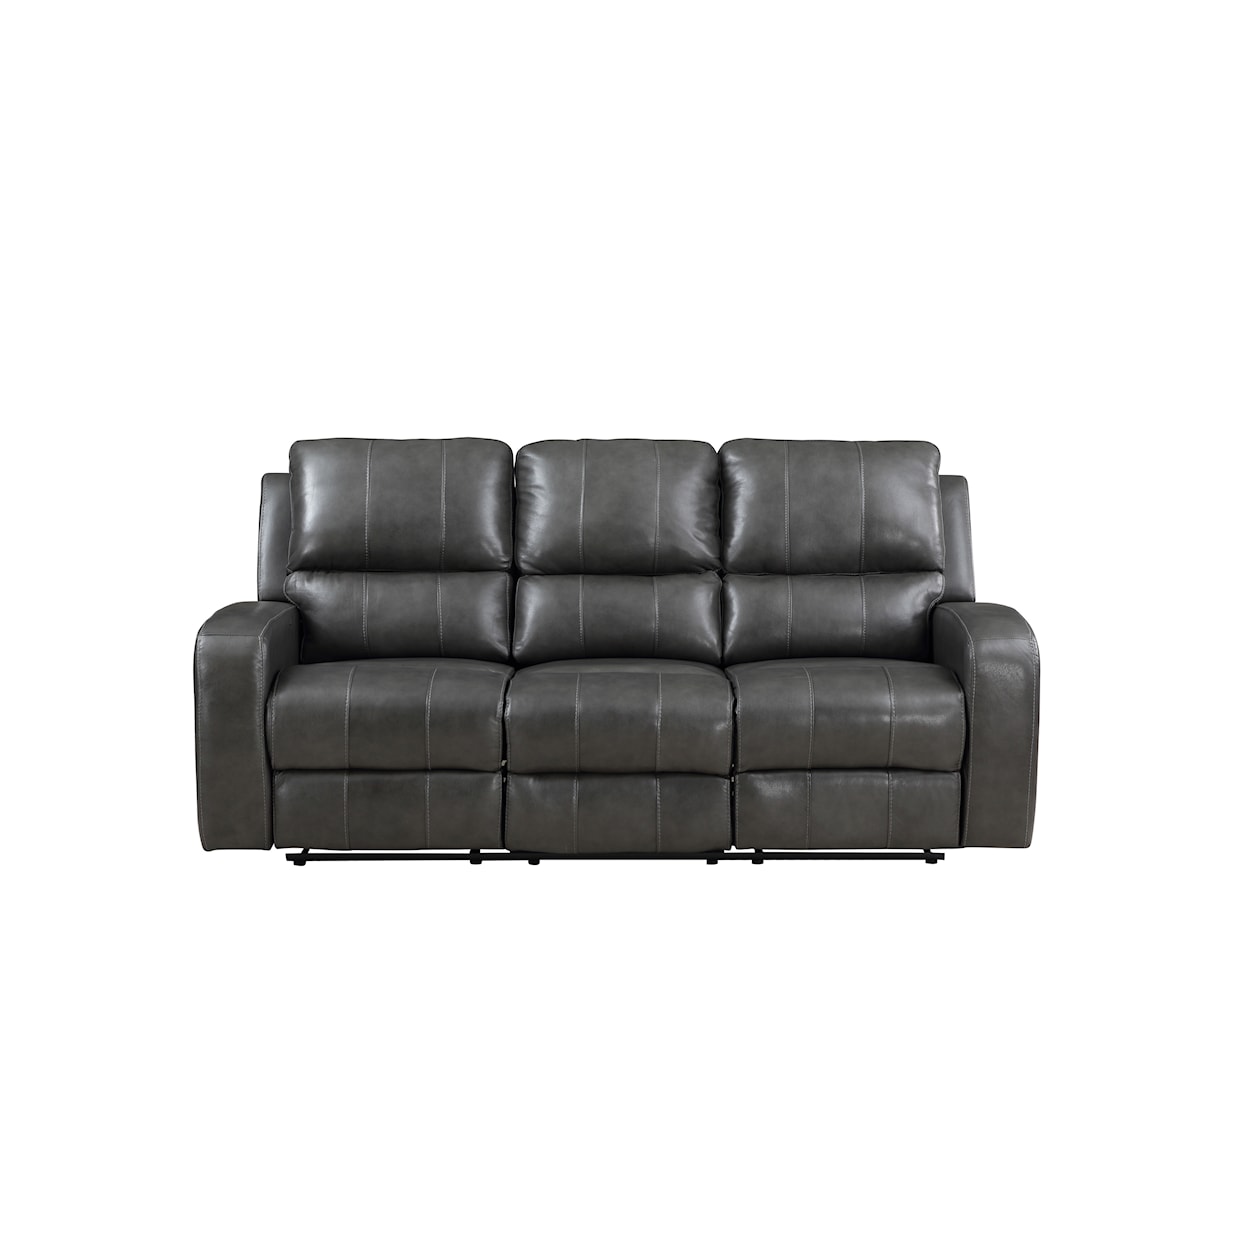 New Classic Furniture Linton Leather Sofa W/Dual Recliner